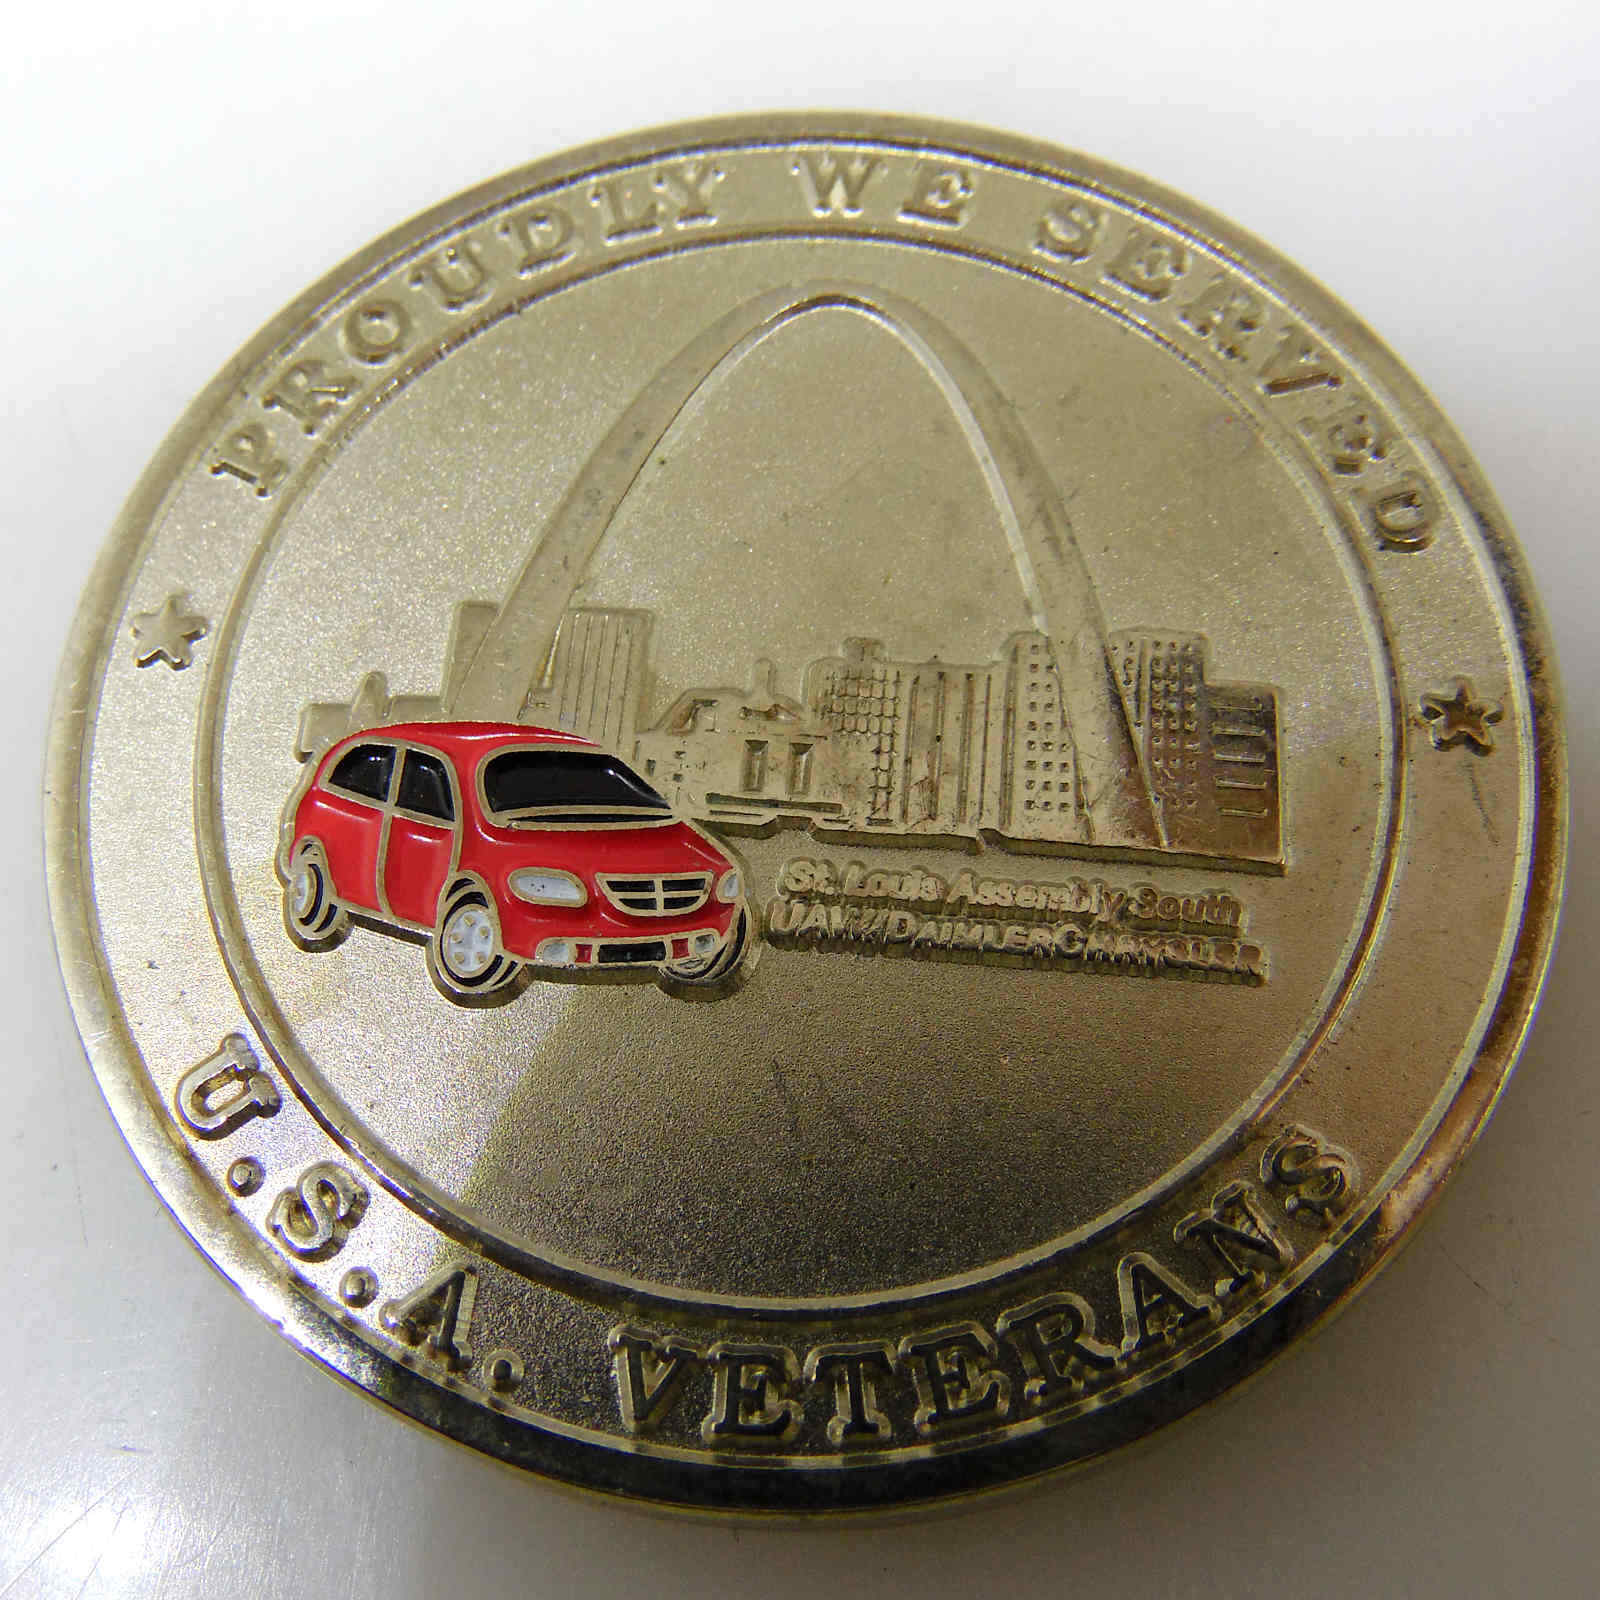 U.S.A. VETERANS PROUDLY WE SERVED CHALLENGE COIN